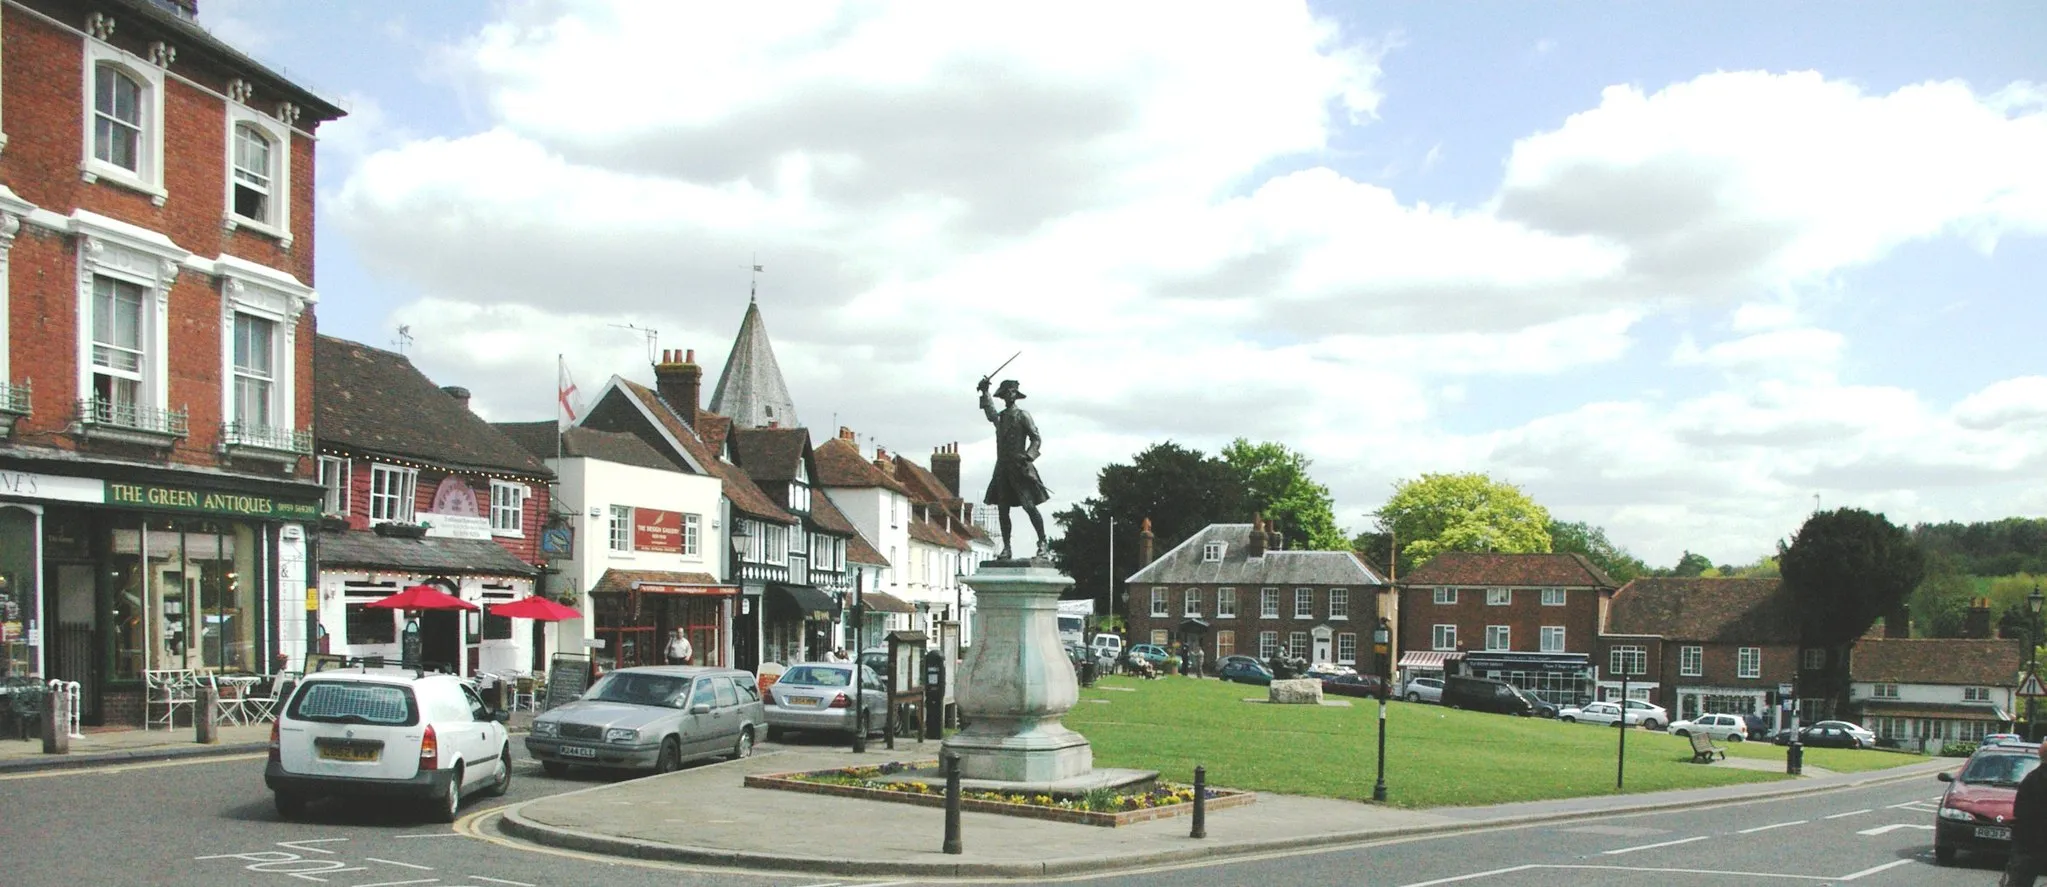 Photo showing: Westerham, Kent, with the statue of General Wolfe in the foreground.

Digital photo by me, Ross Burgess, 6 May 2005.